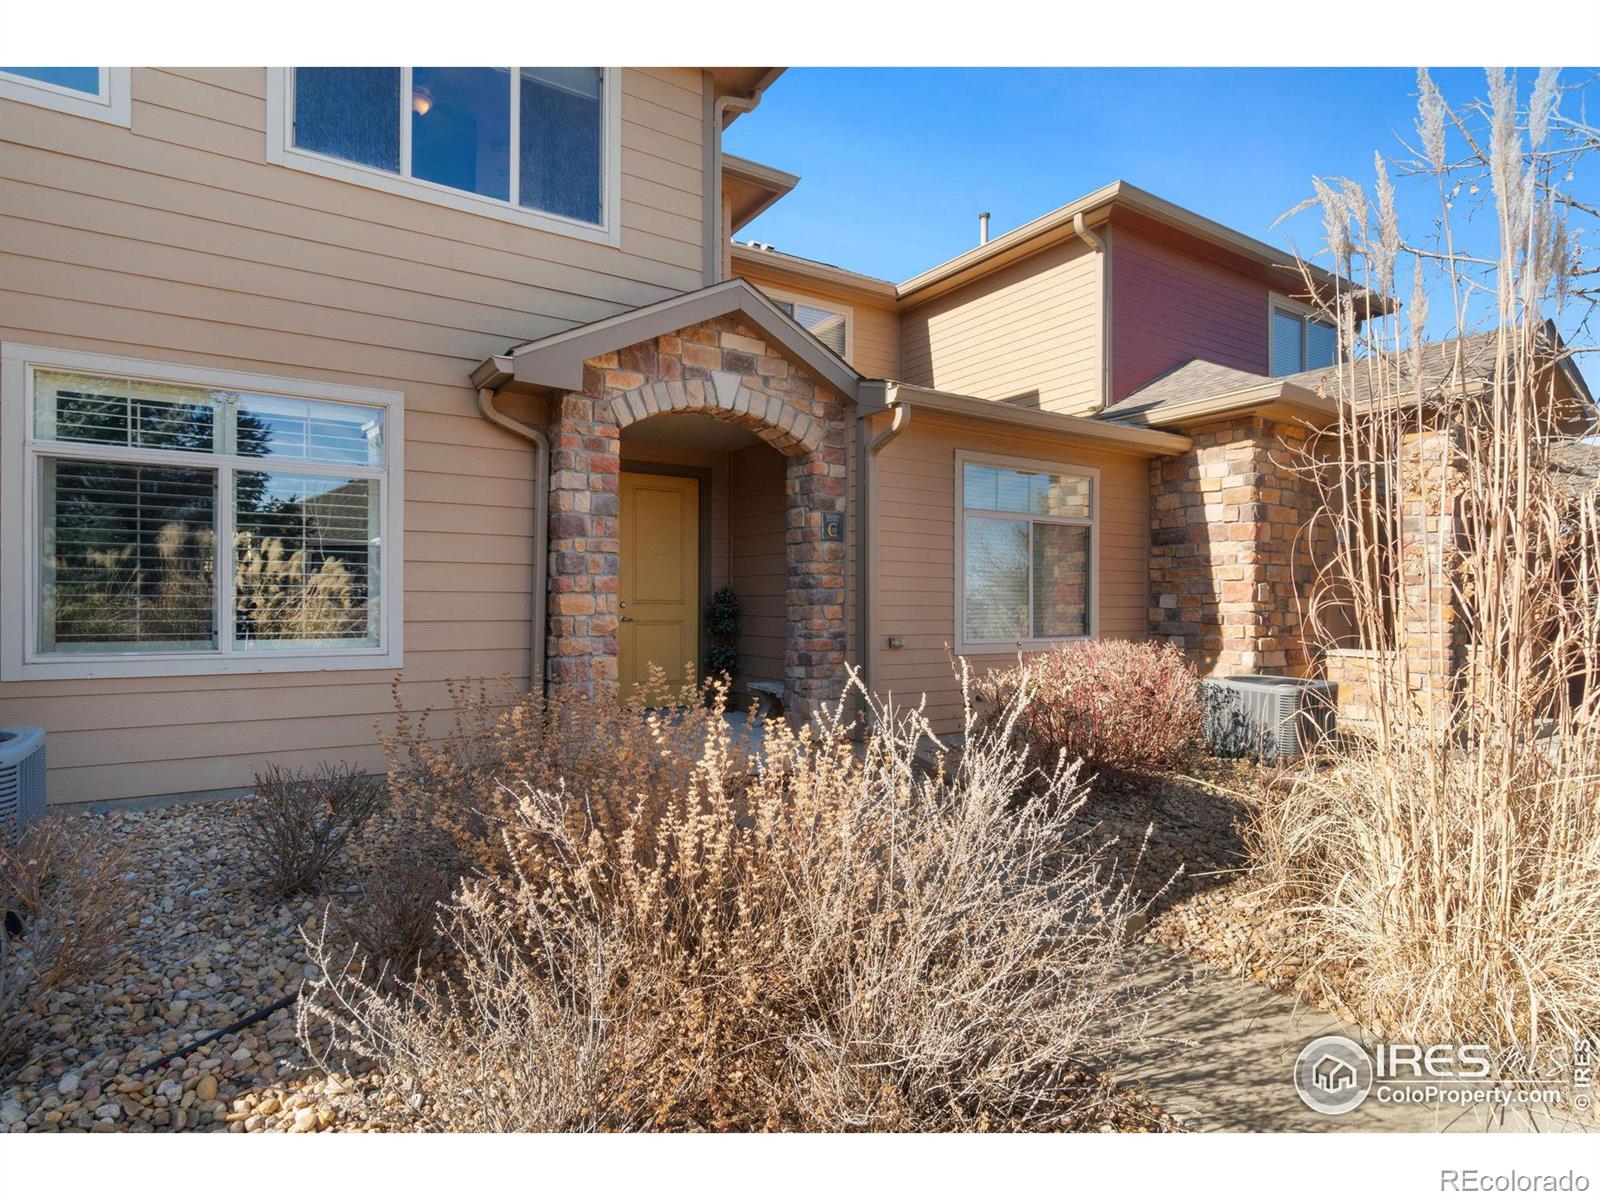 8546  gold peak lane, highlands ranch sold home. Closed on 2024-02-21 for $500,000.